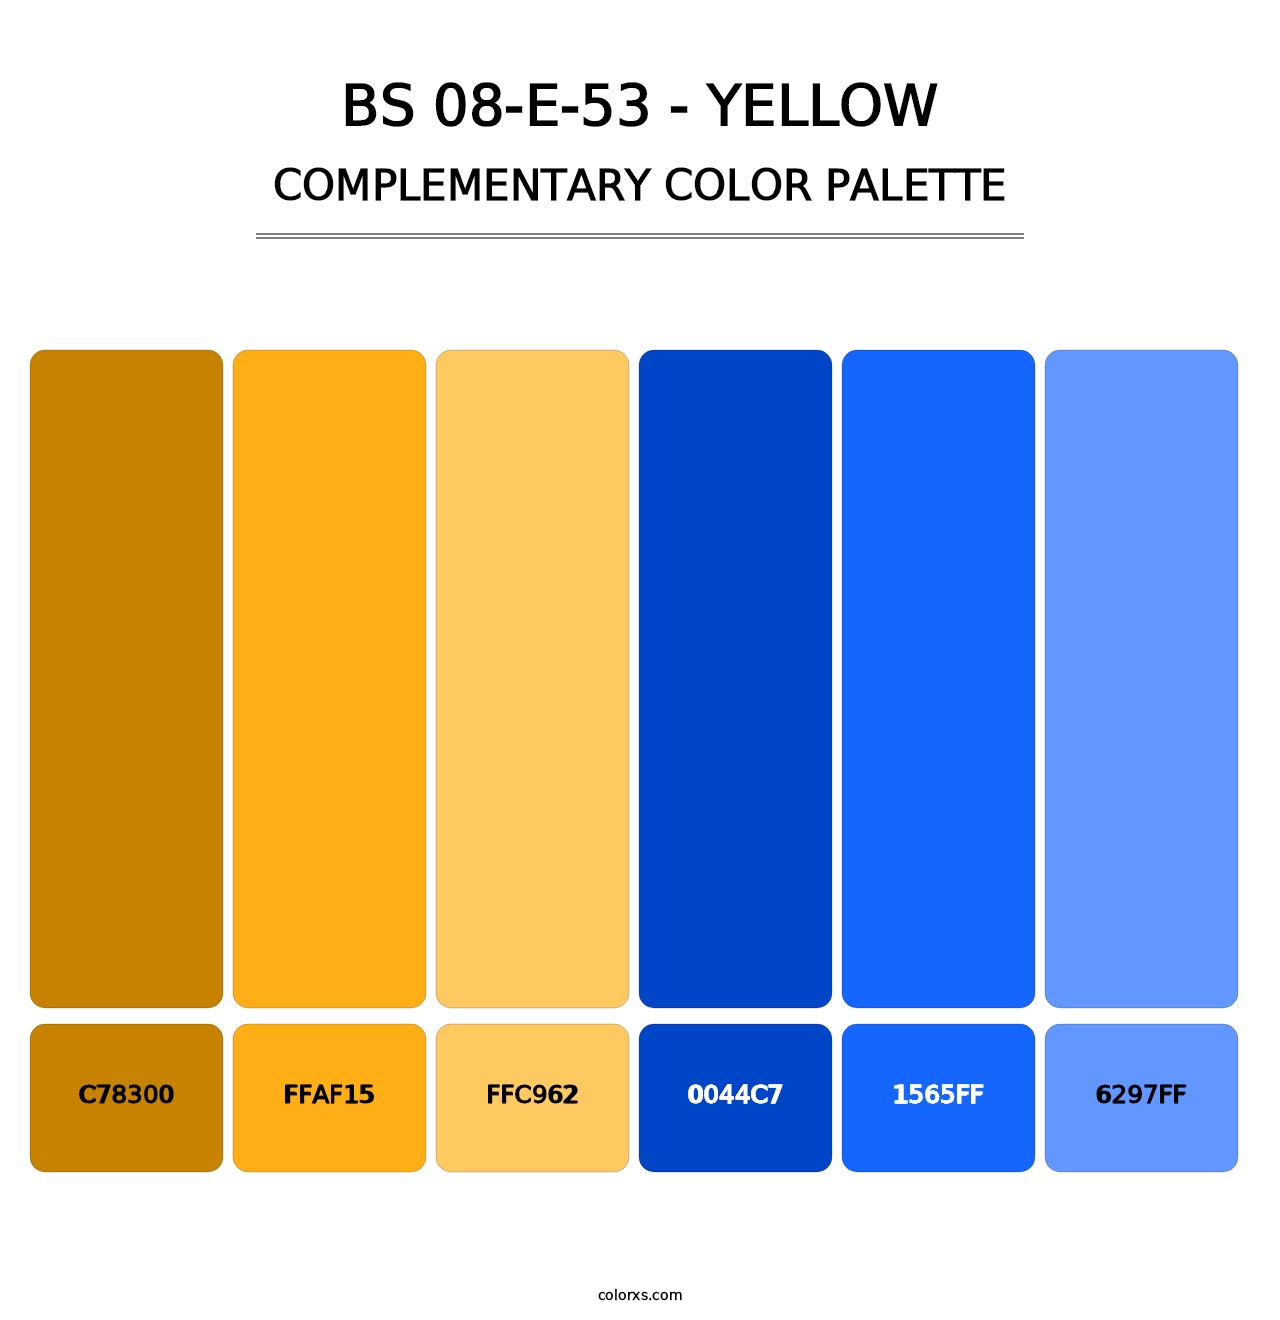 BS 08-E-53 - Yellow - Complementary Color Palette